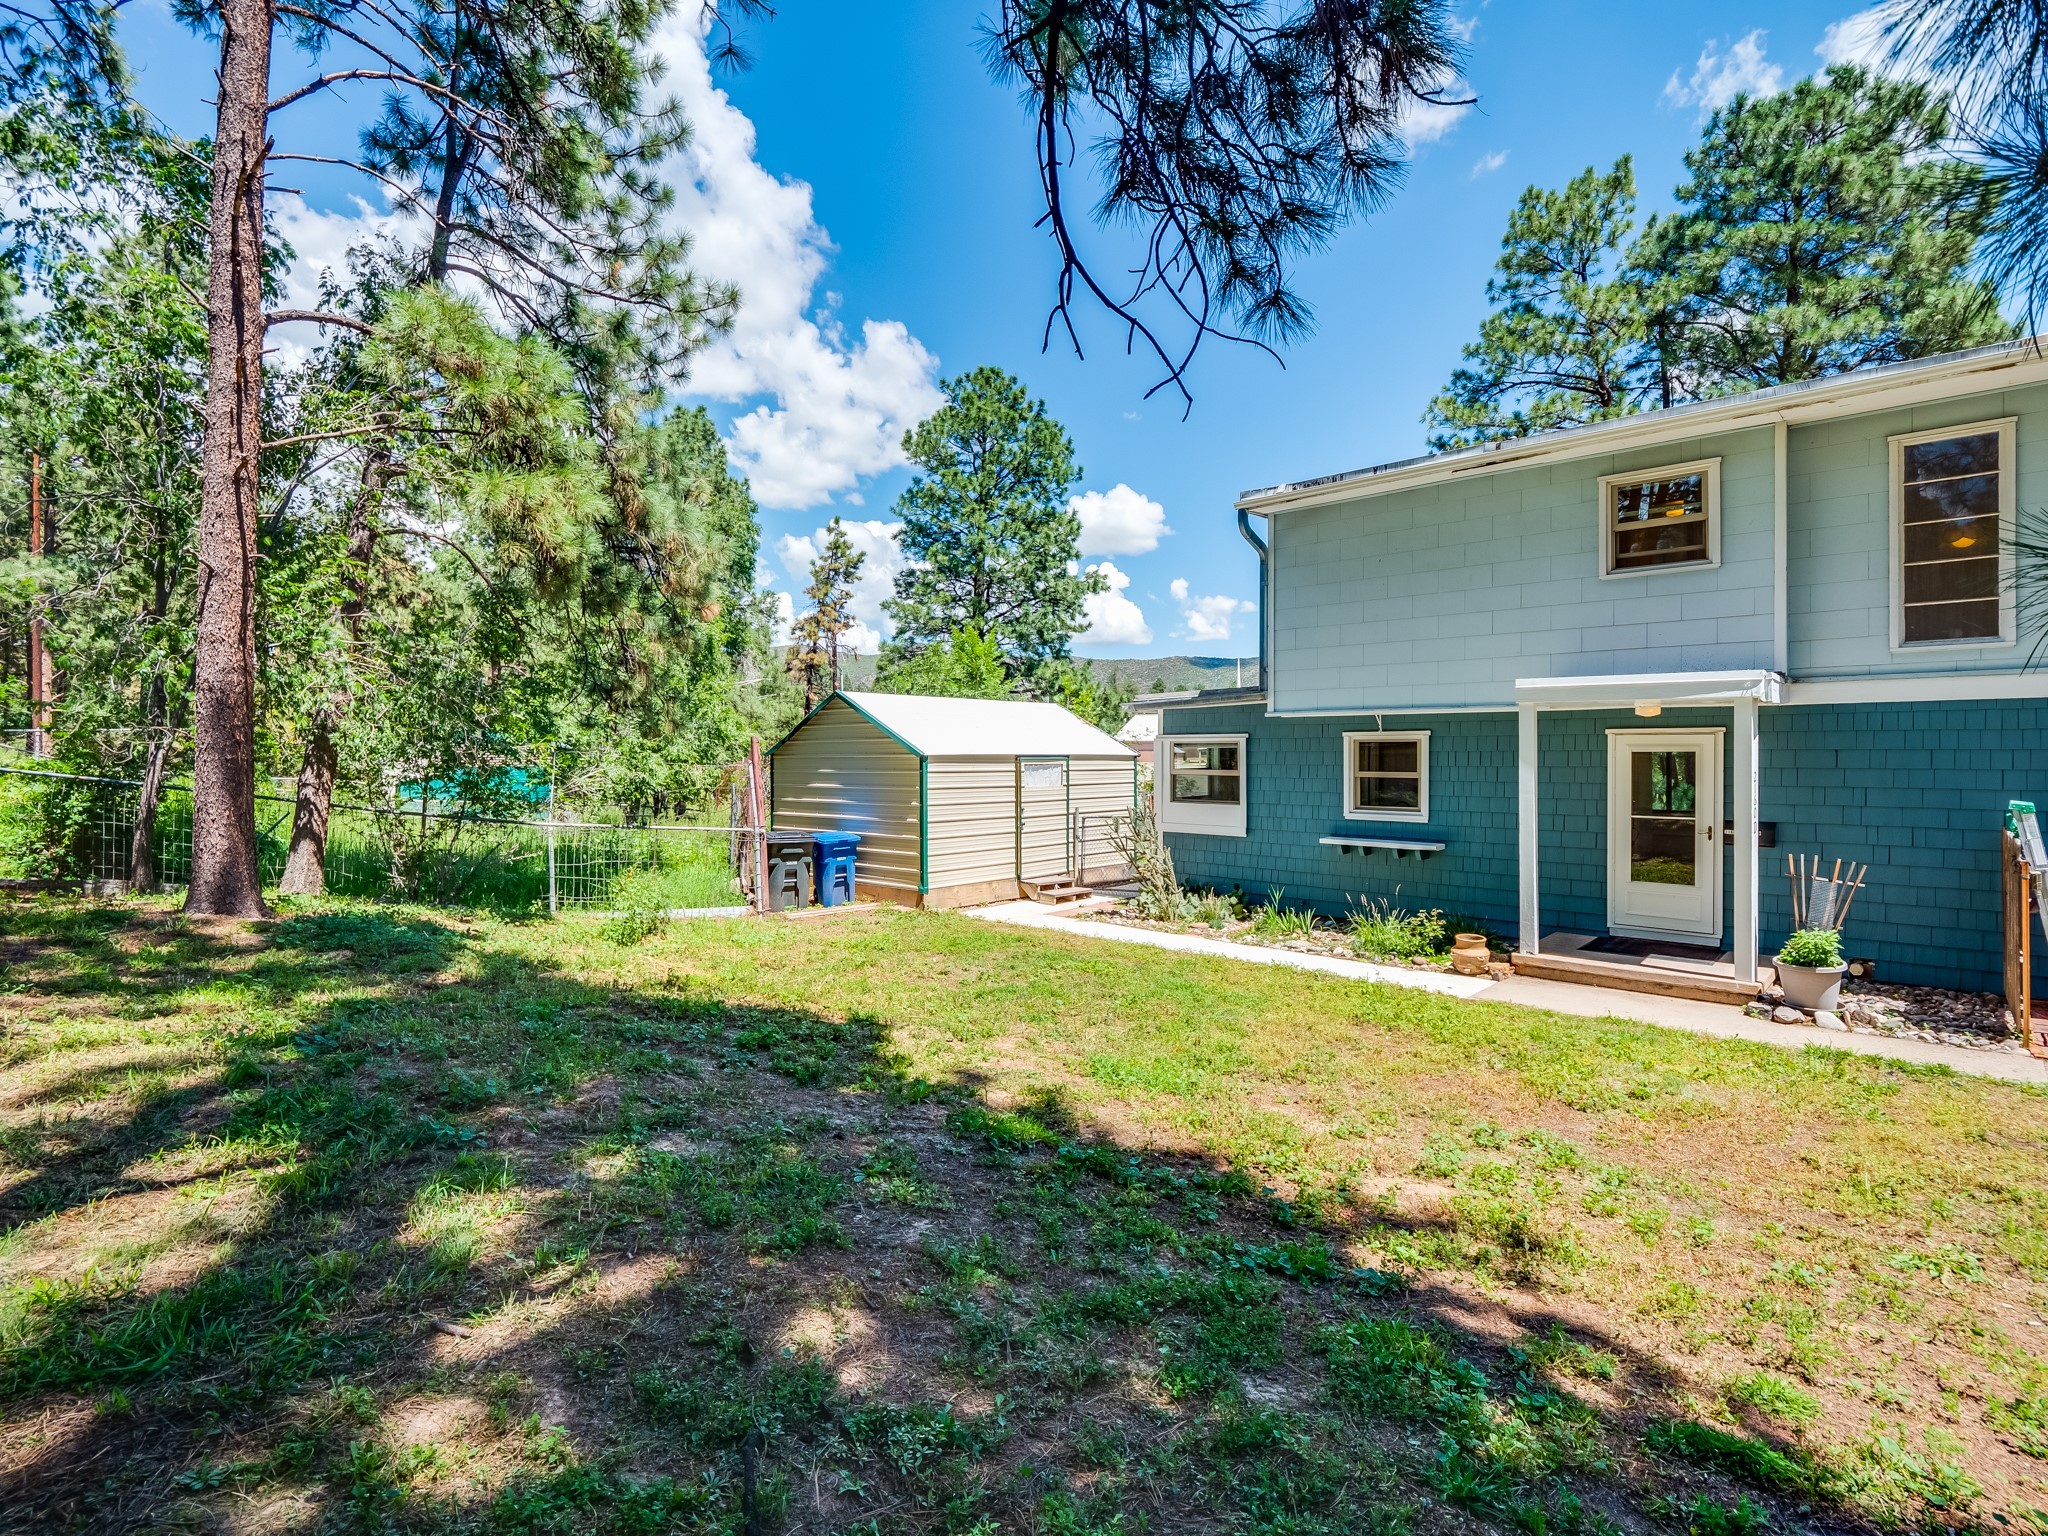 2160 41st D, Los Alamos, New Mexico 87544, 2 Bedrooms Bedrooms, ,1 BathroomBathrooms,Residential,For Sale,2160 41st D,202232668